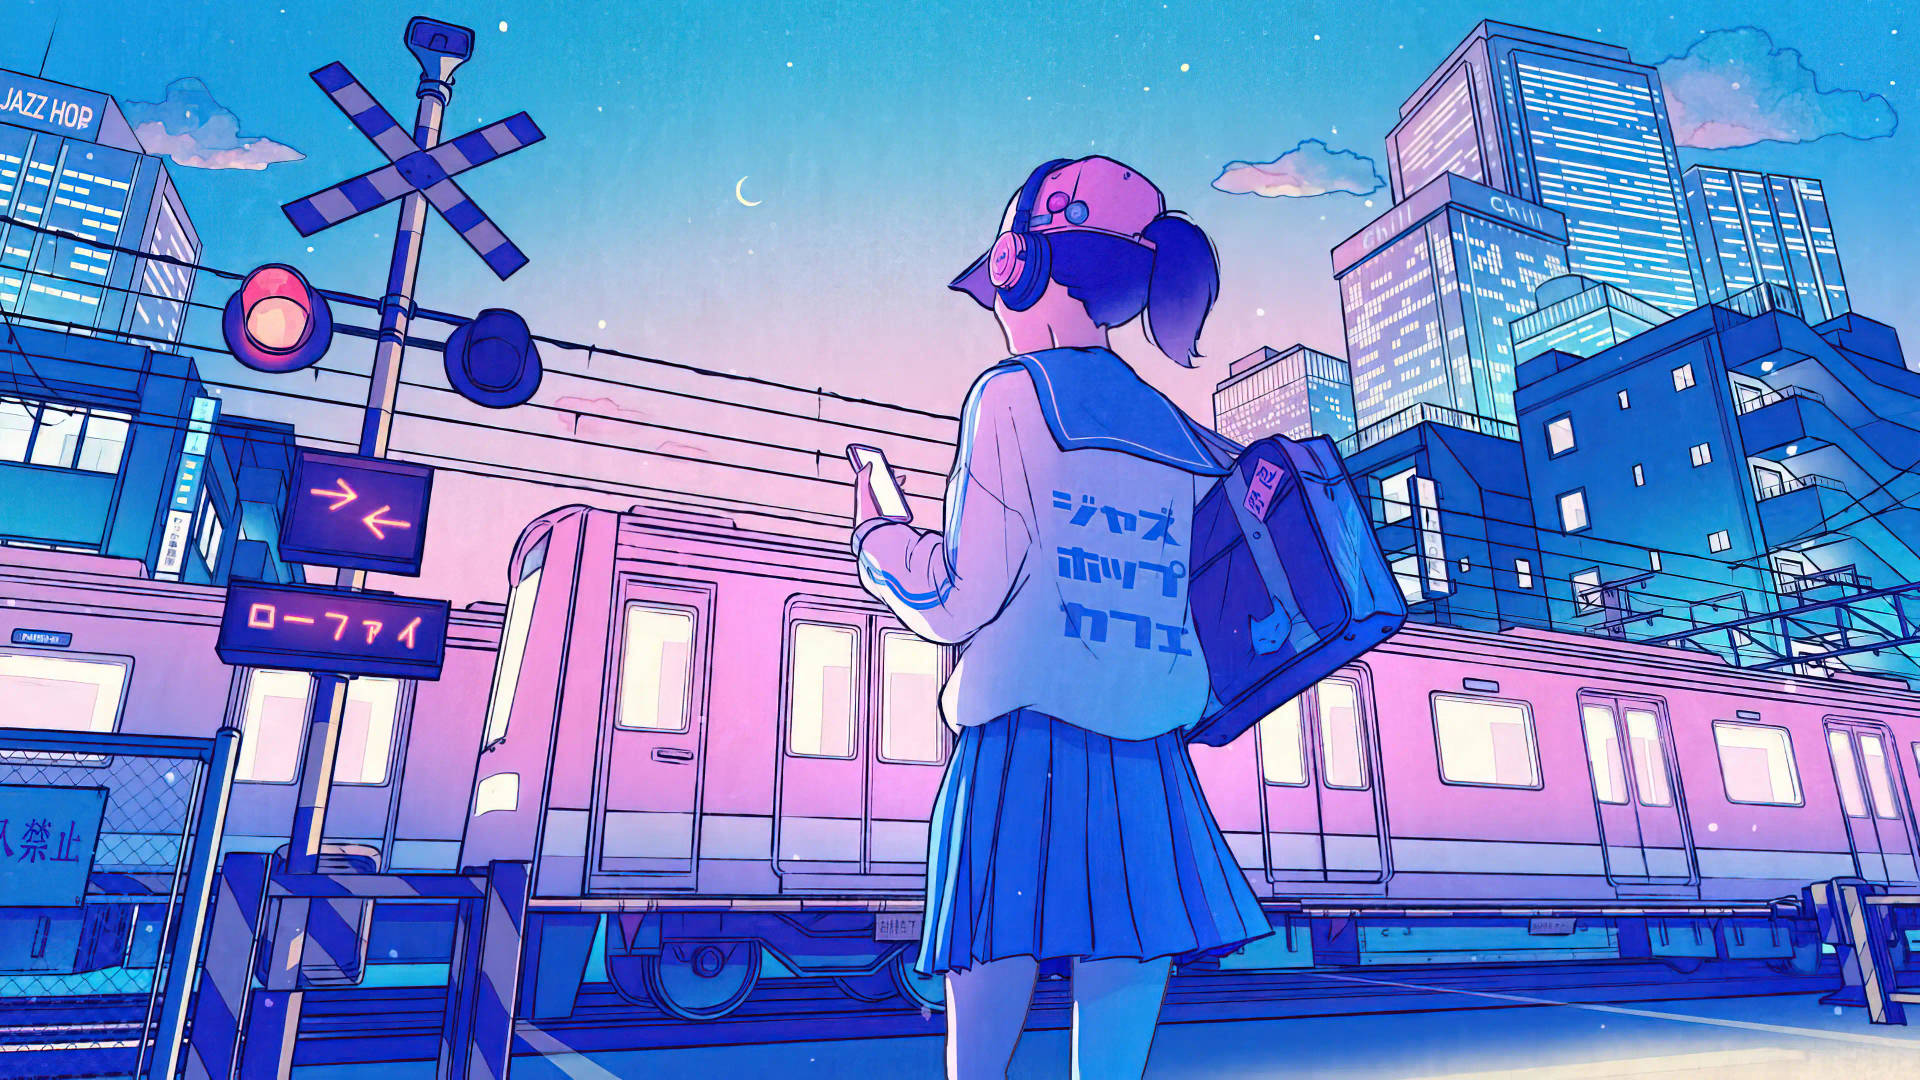 100+] Aesthetic Anime City Wallpapers 